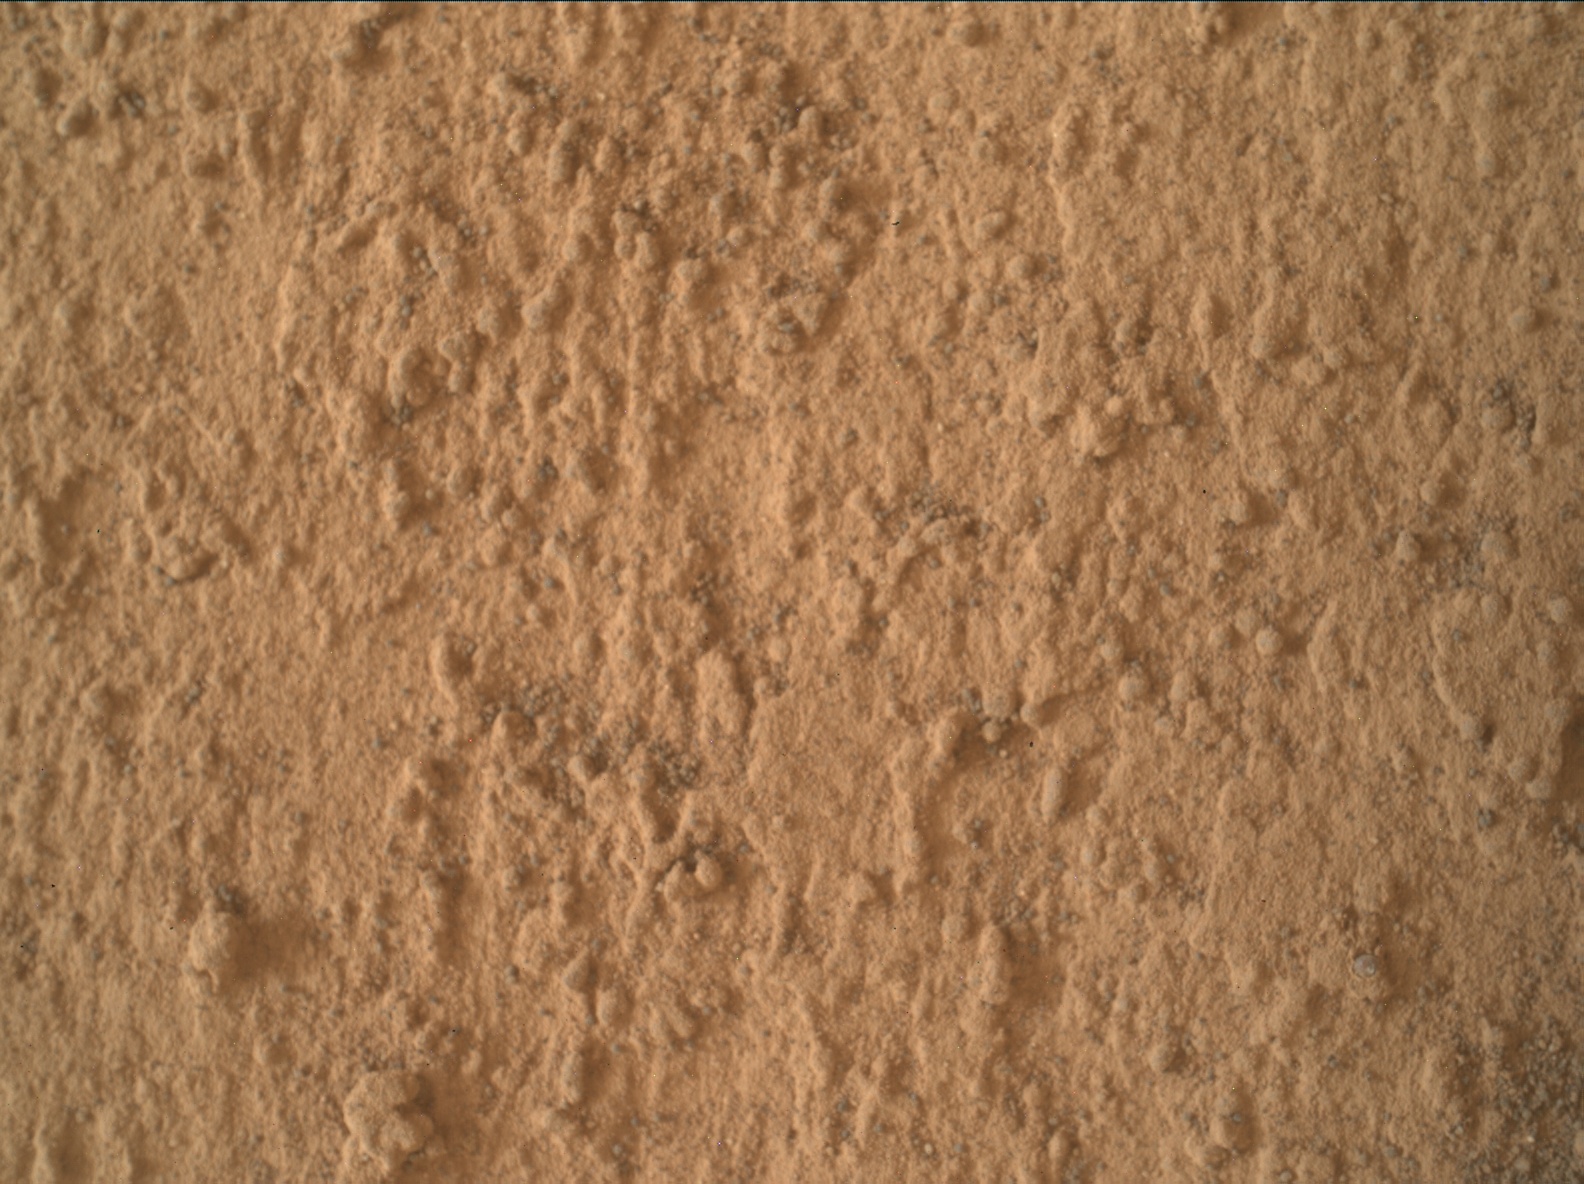 Nasa's Mars rover Curiosity acquired this image using its Mars Hand Lens Imager (MAHLI) on Sol 3466